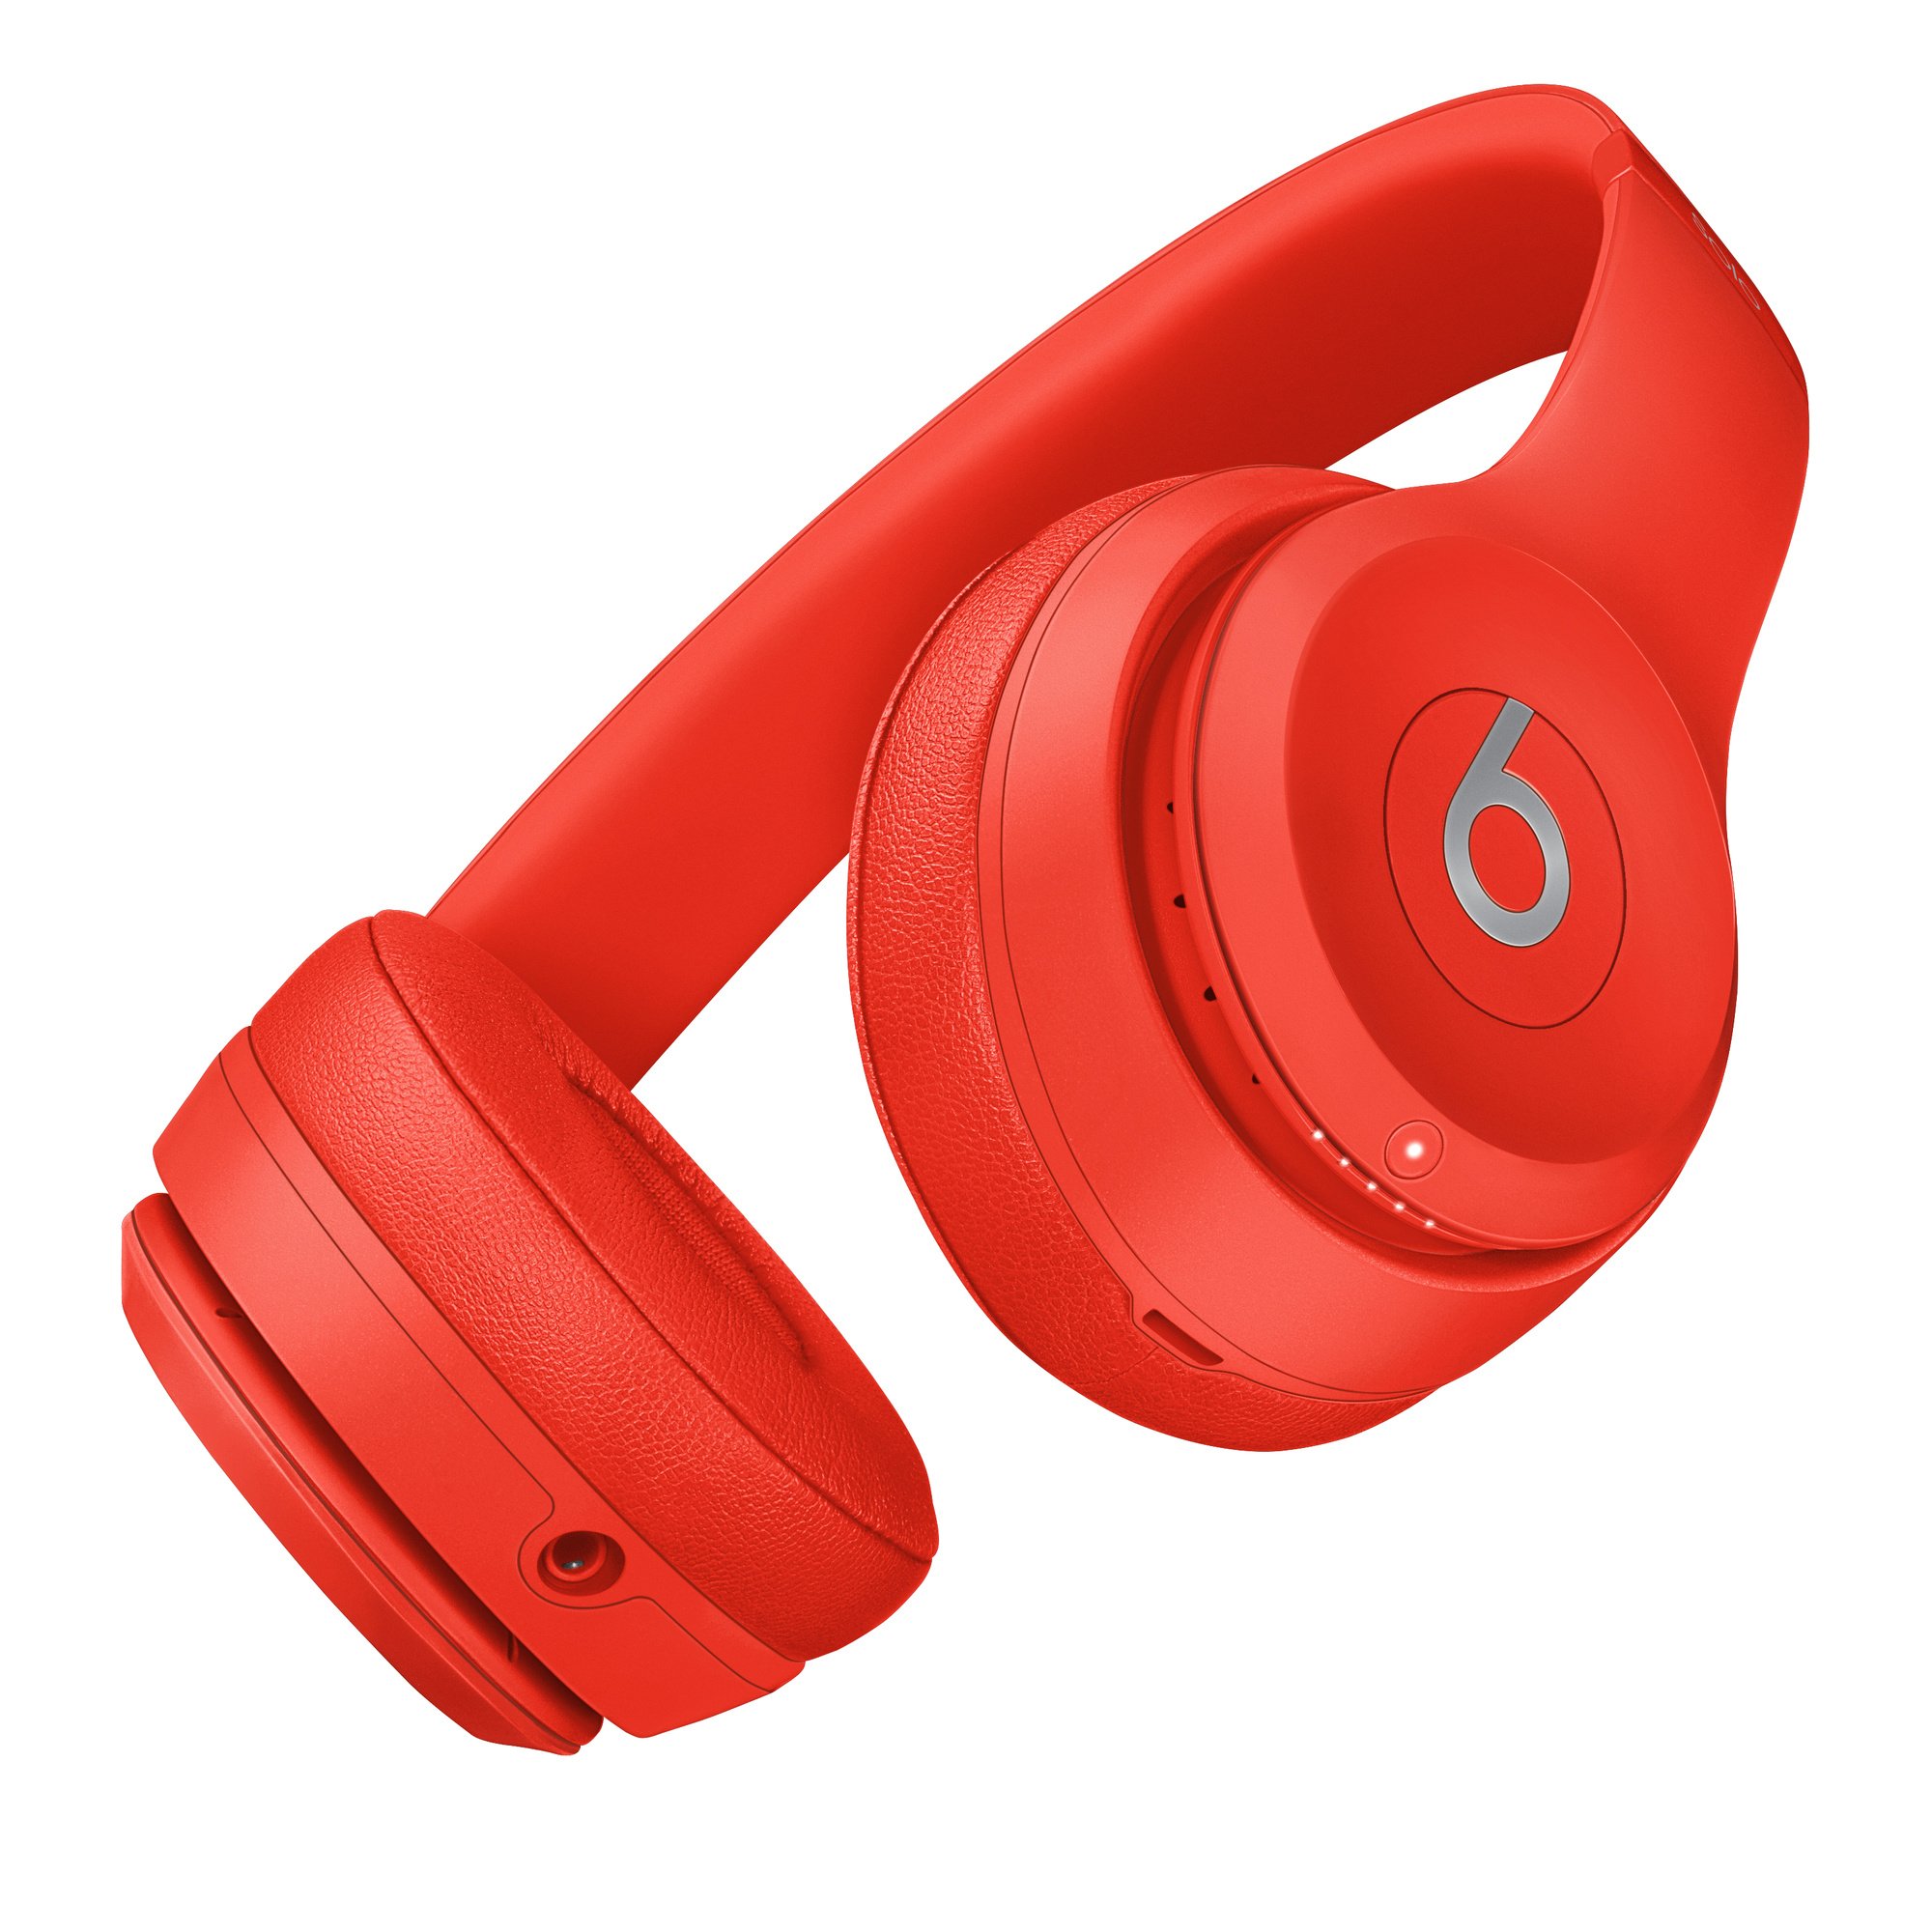 Beats Solo 4 wireless headphones to launch next month; specifications leaked - Apple - News